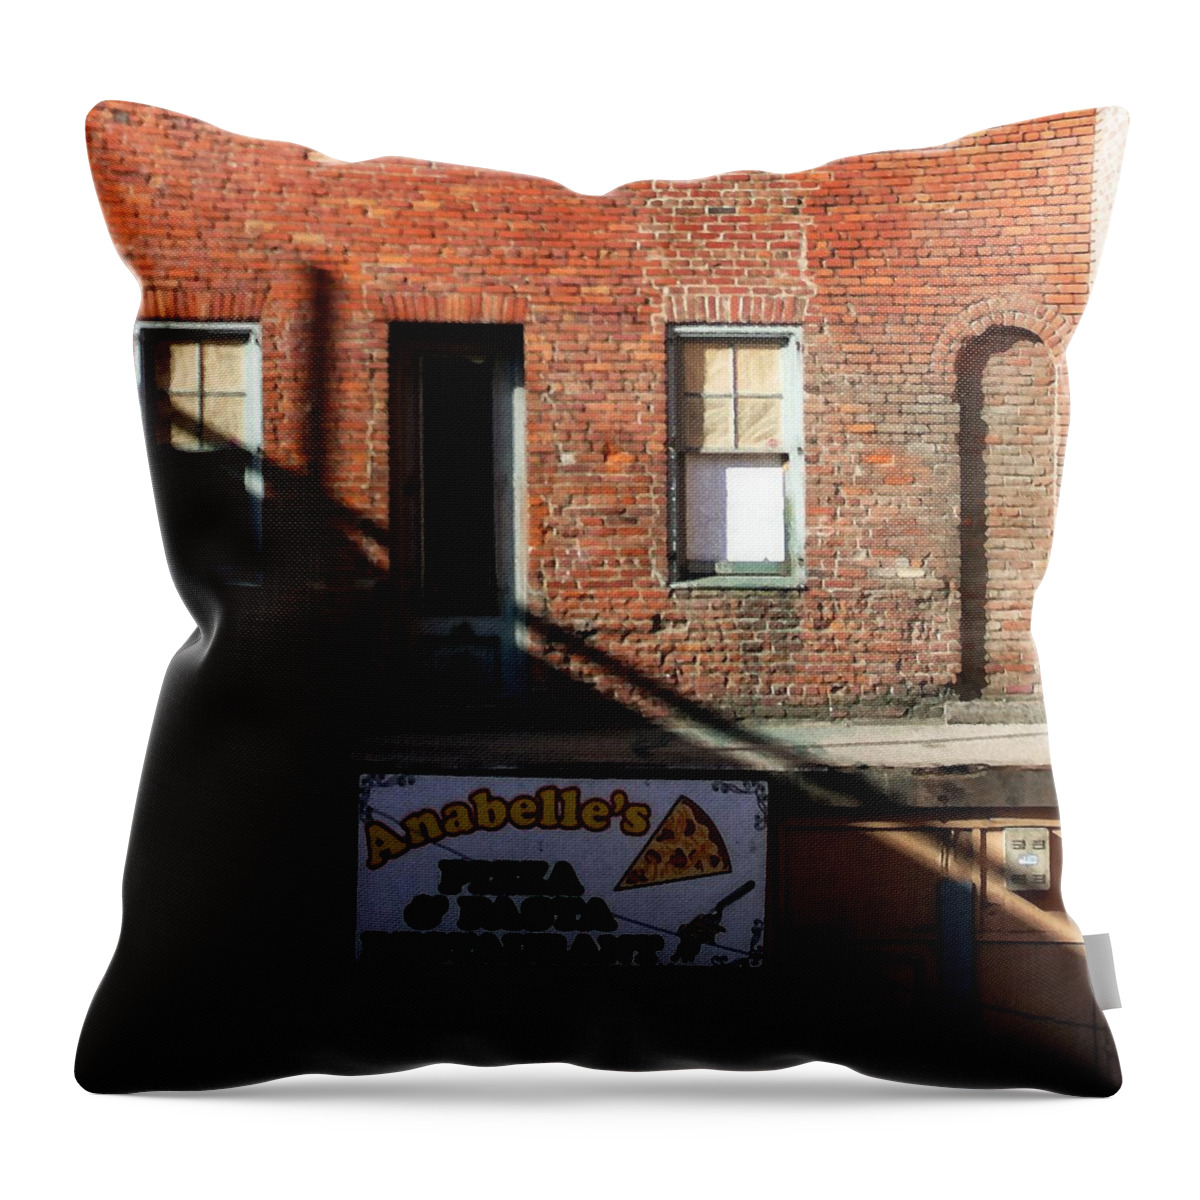 Anabelle's Pizza And Pasta Restaurant Throw Pillow featuring the photograph Anabelle's by Timothy Bulone